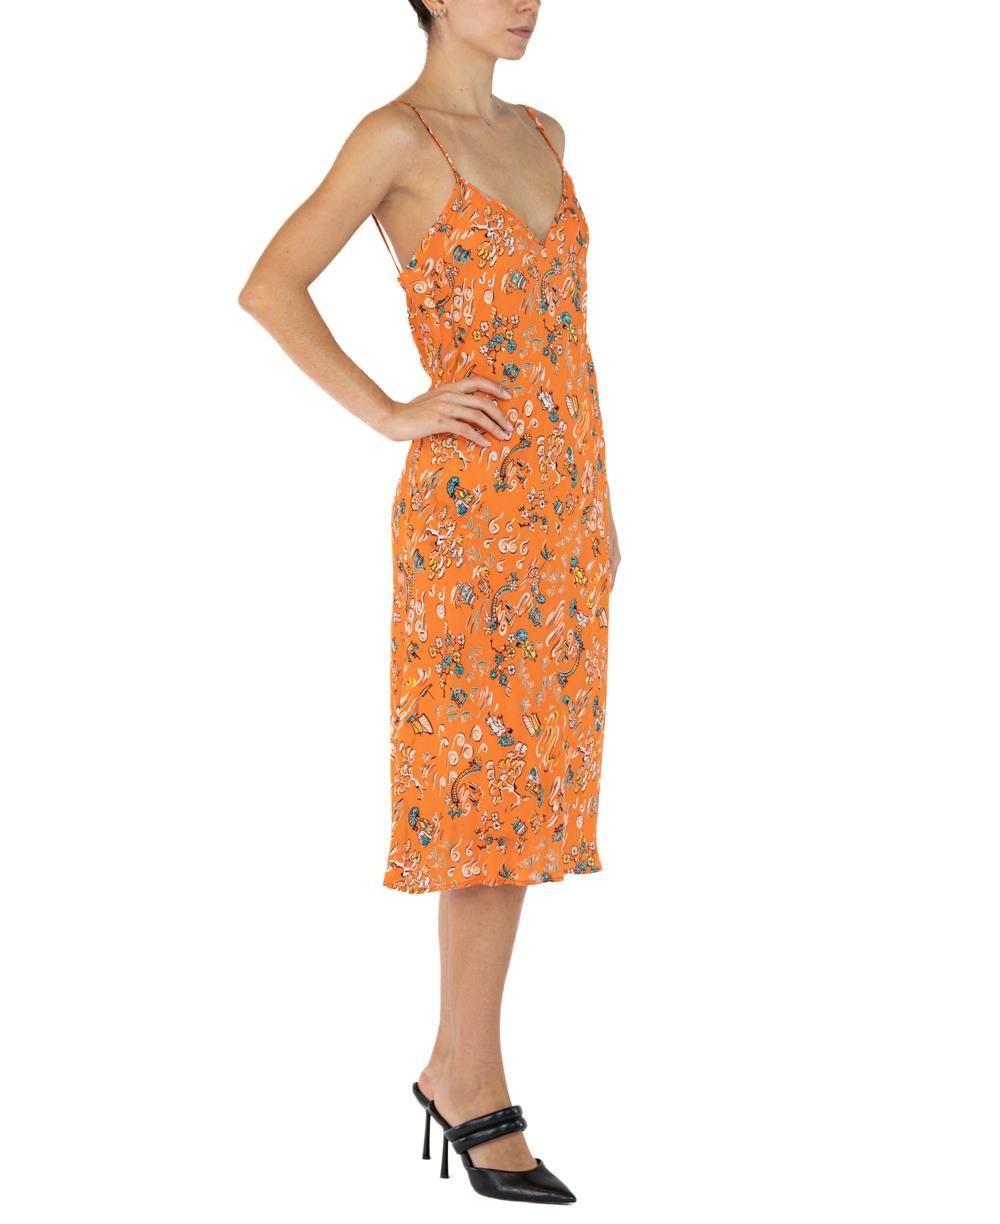 Morphew Collection Orange & Green Cherry Blossom Novelty Print Cold Rayon Bias  For Sale 4